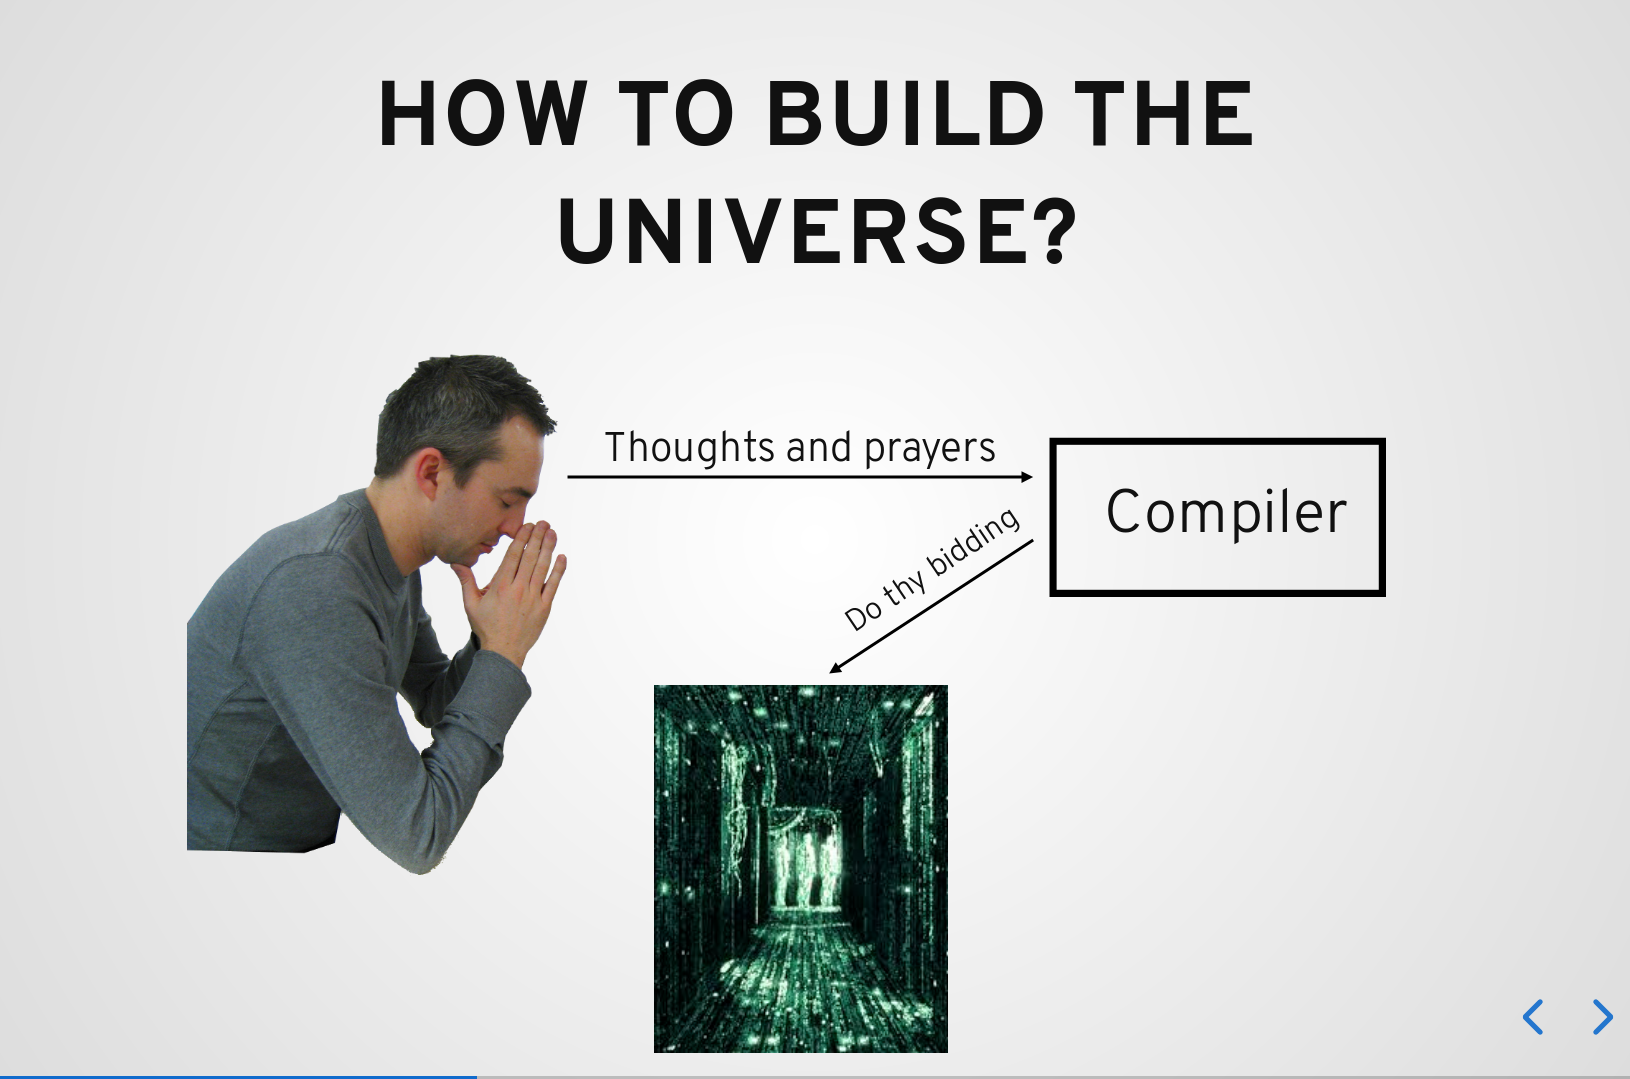 Pray to the compiler